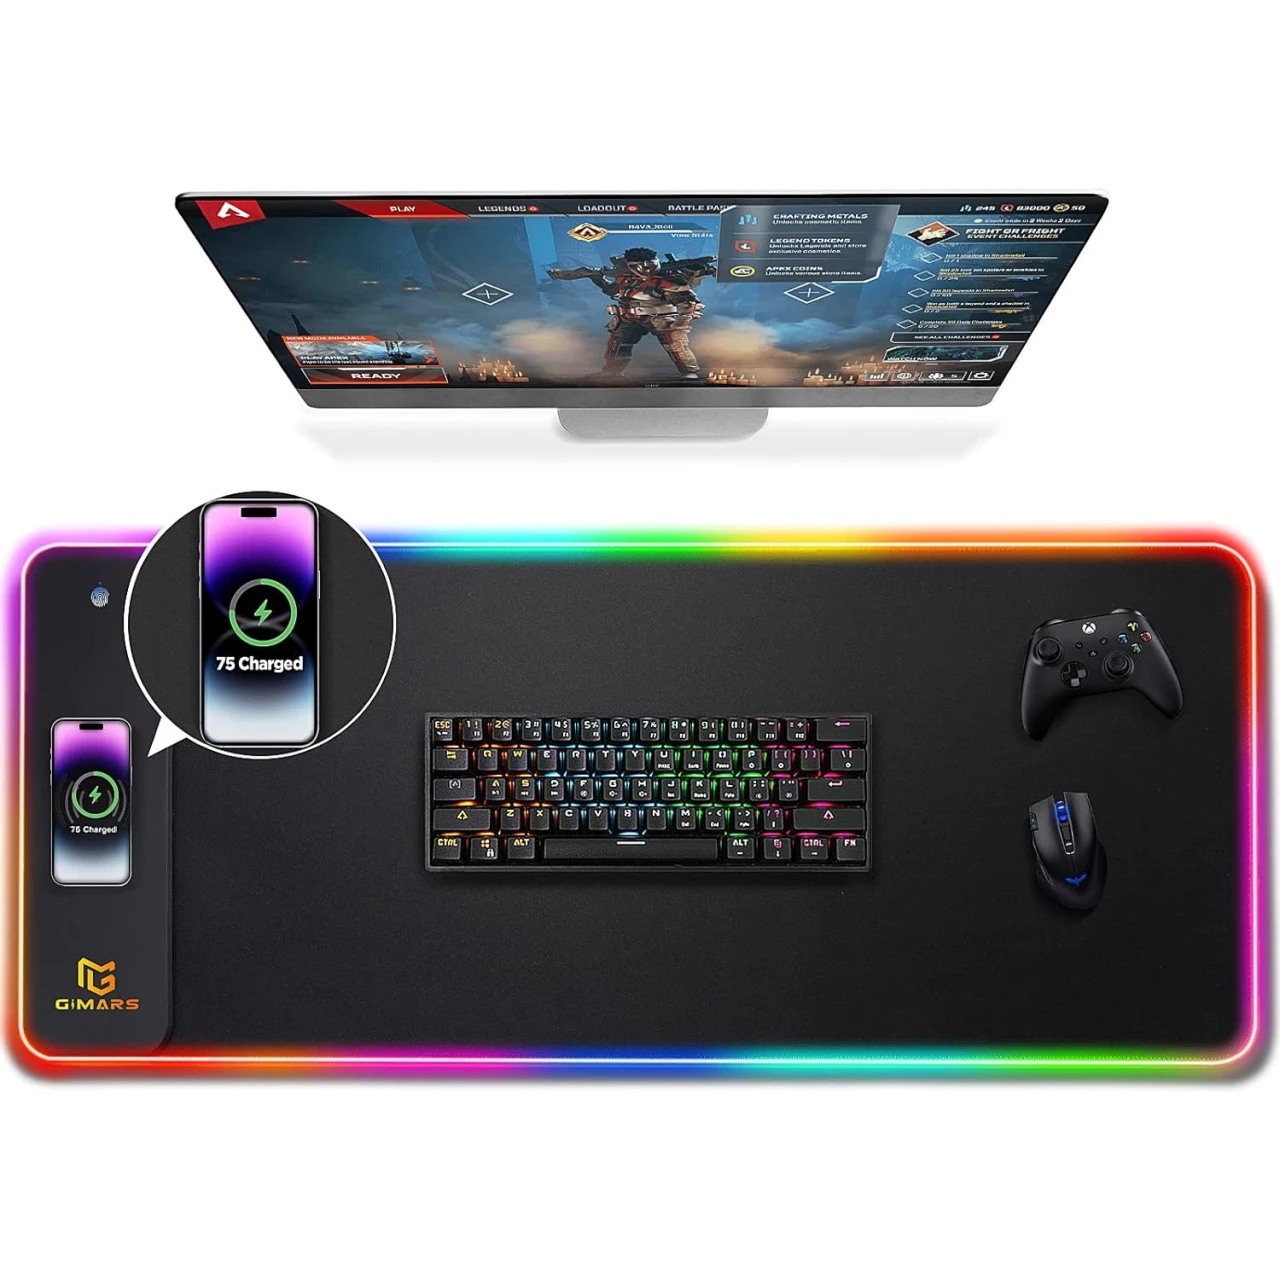 Gimars RGB Mouse Pad with Wireless Charging, Extended Large Gaming Mouse Pad